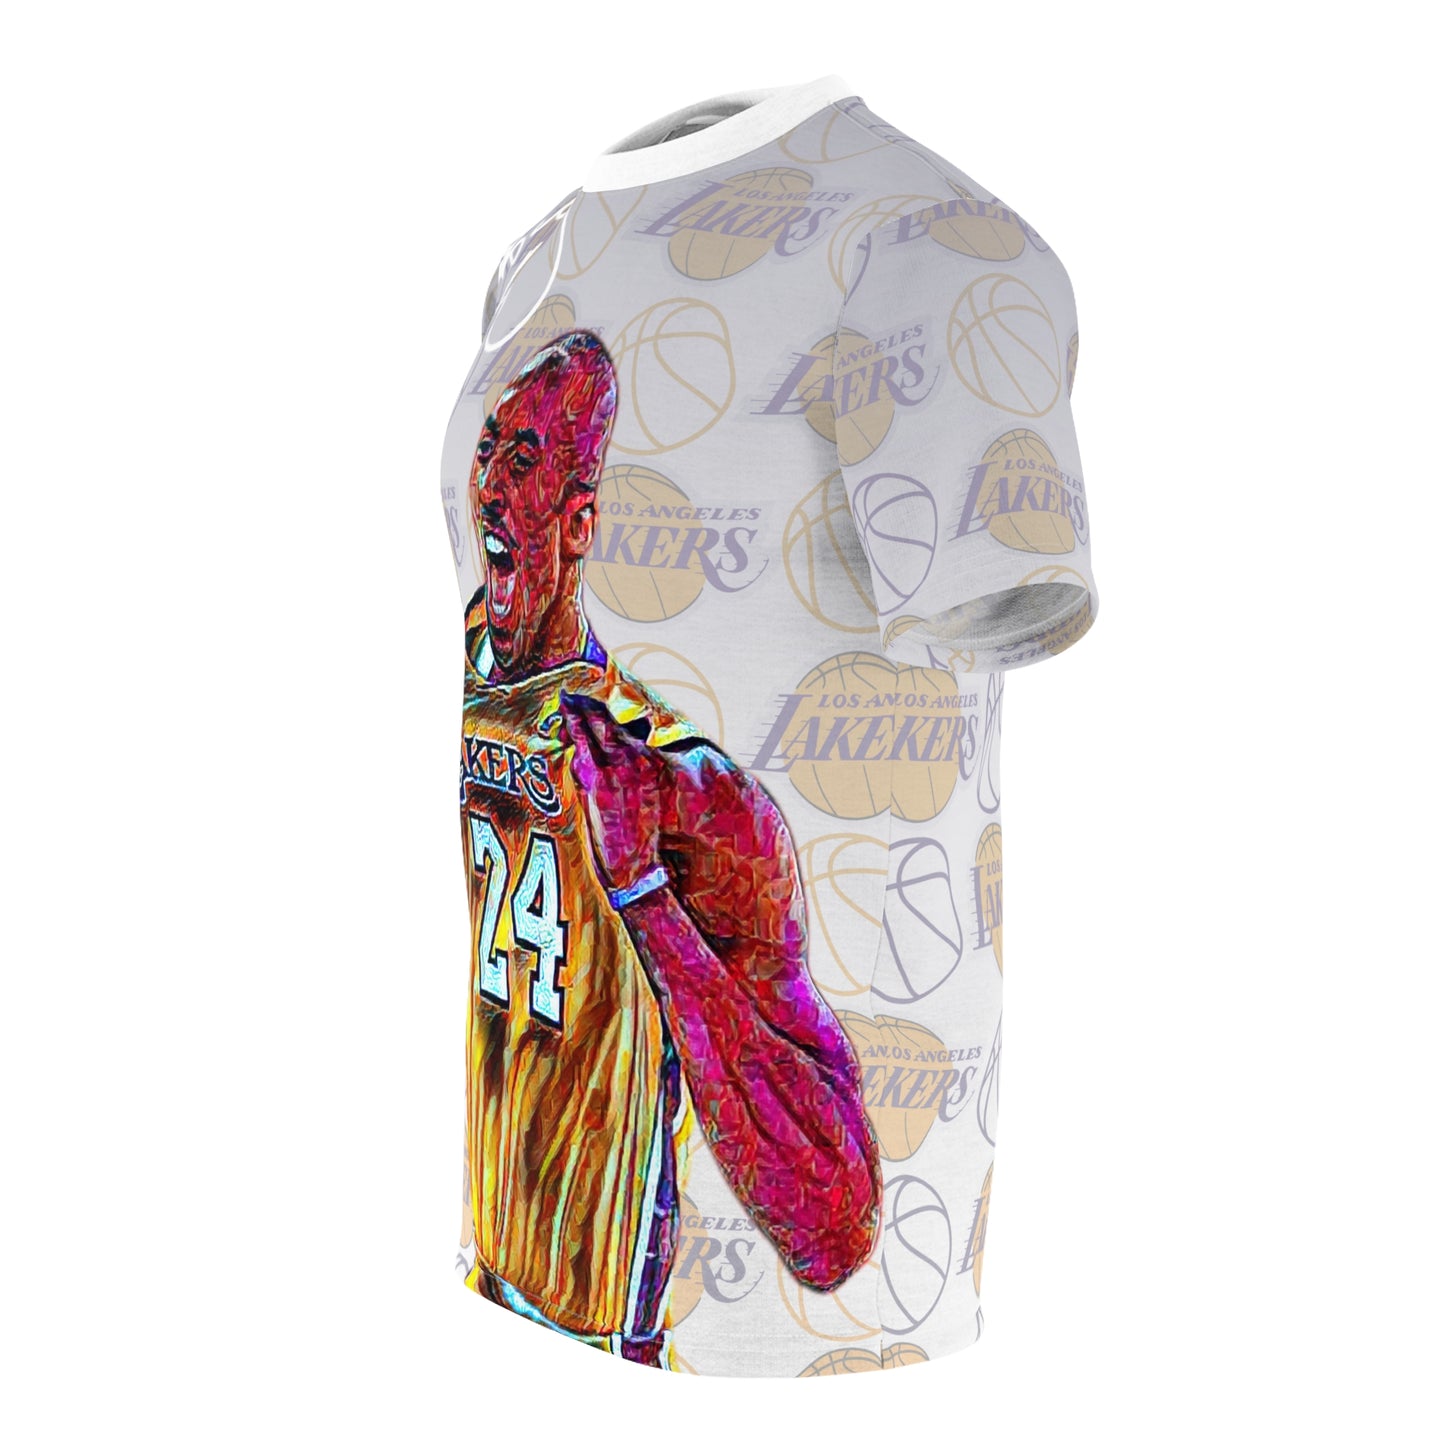 NBA All-Star Kobe Bryant AOP Graphic Tee right